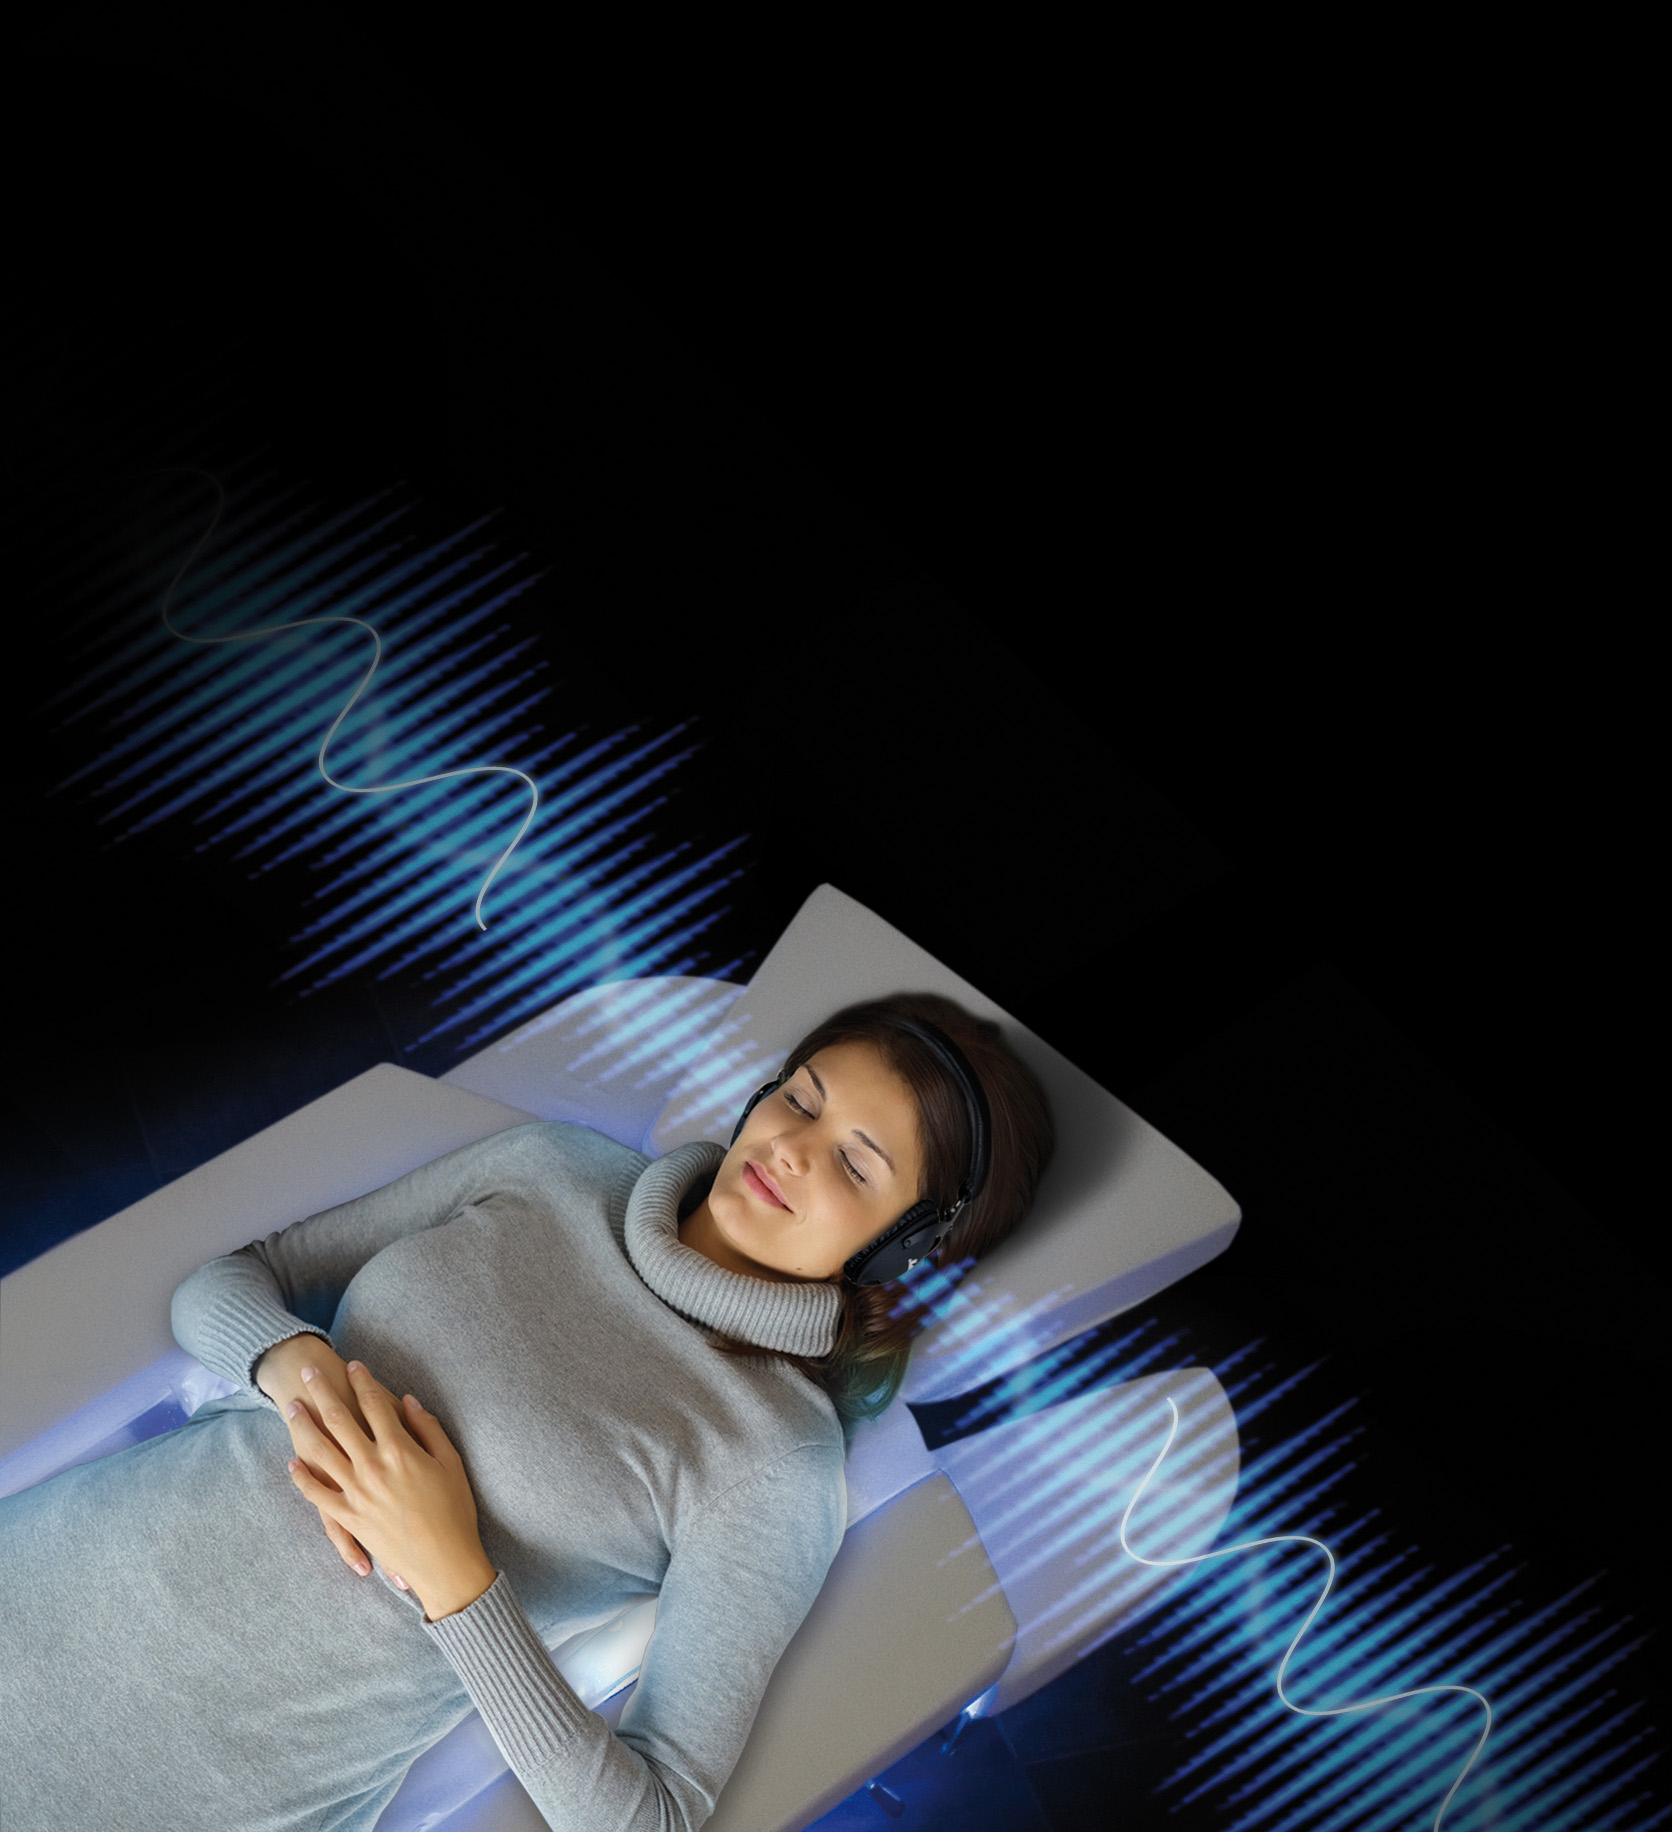 Woman relaxing with her eyes closed on bed wearing headphones